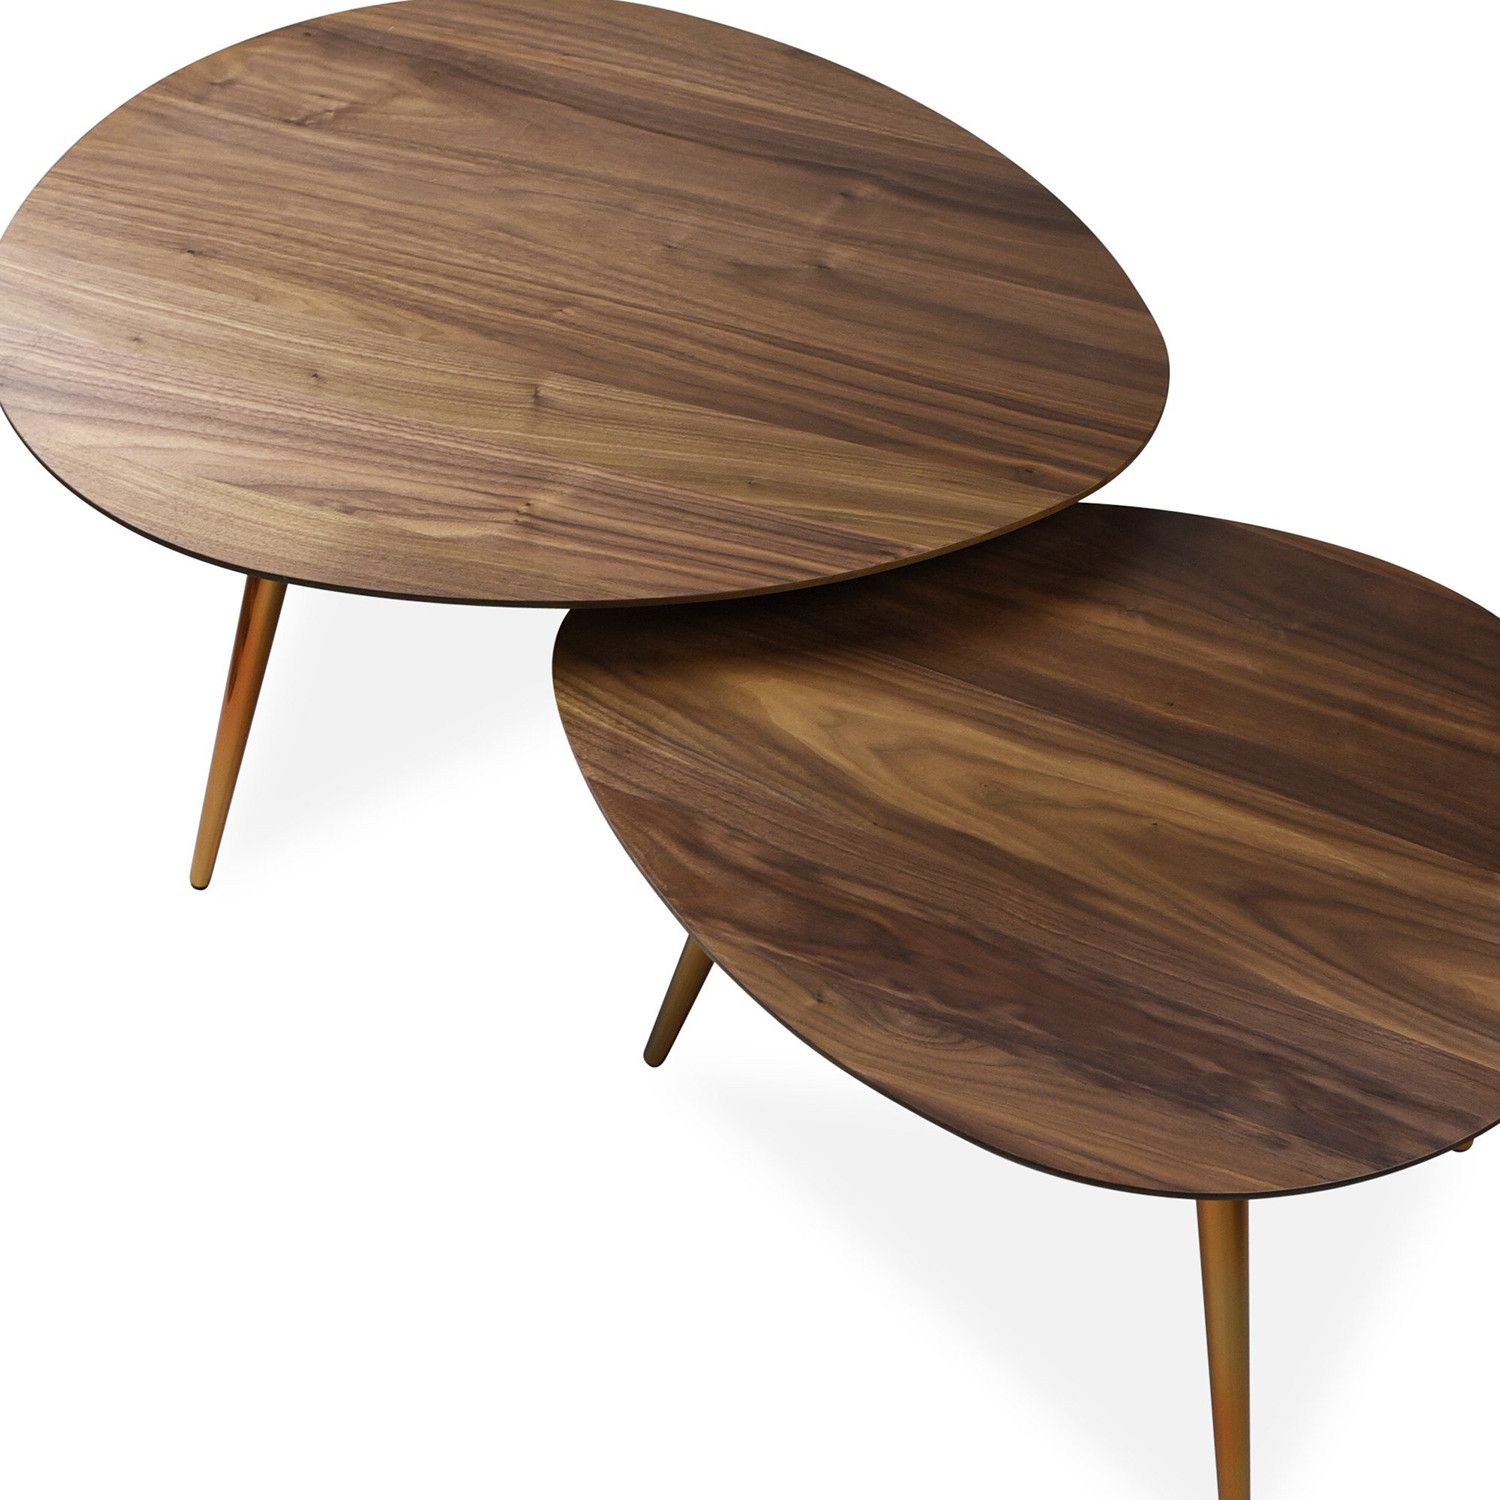 Maddox Mid Century Modern Nesting Coffee Table Set – Edloe Finch With Regard To Mid Century Modern Coffee Tables (View 9 of 20)